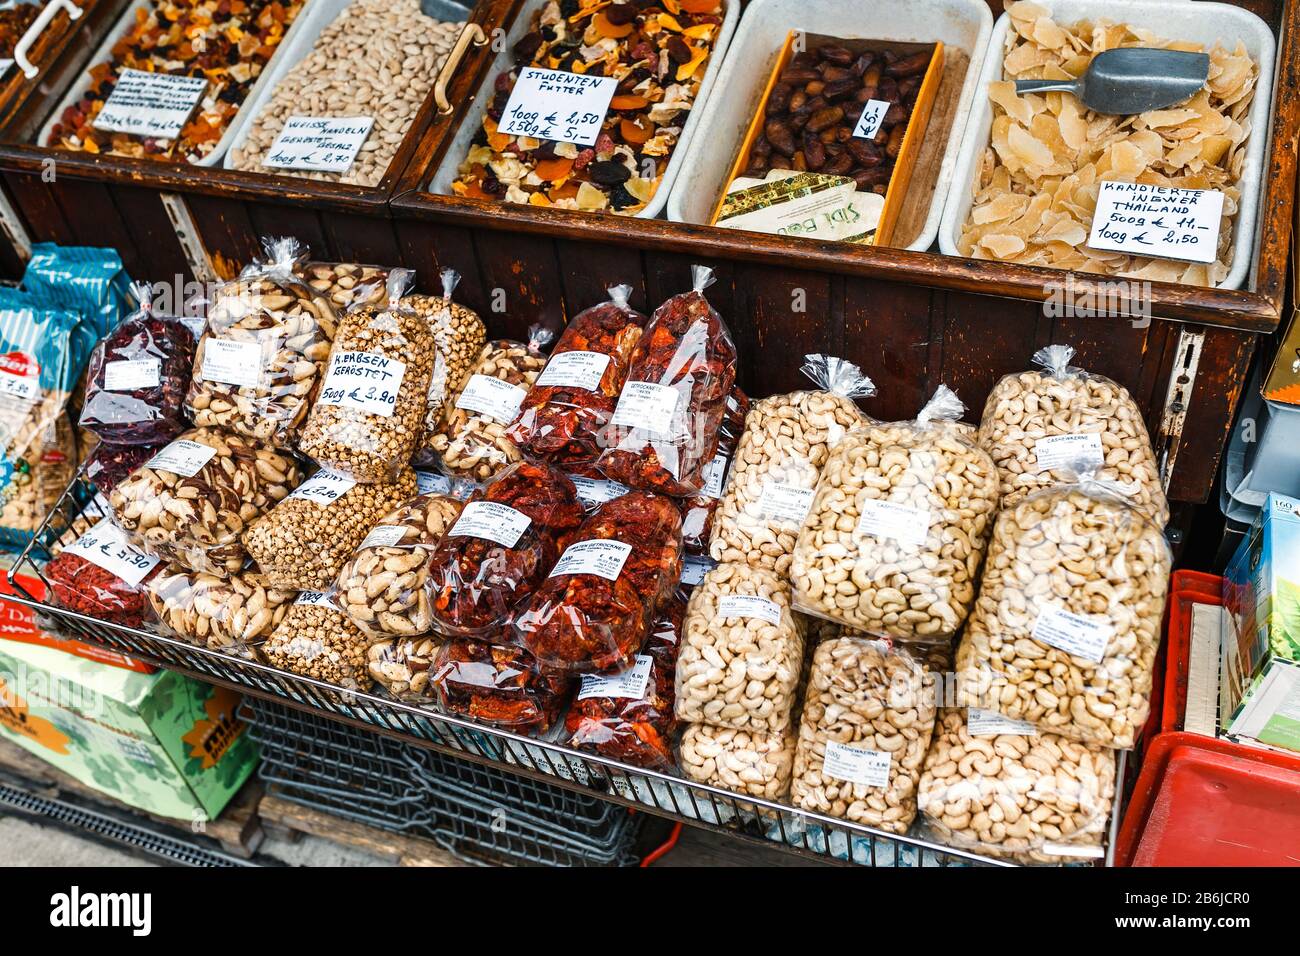 VIENNA, AUSTRIA, 23 MARCH 2017: Market stall with various dried fruits and nuts at the Naschmarkt most popular center food market in Vienna Stock Photo